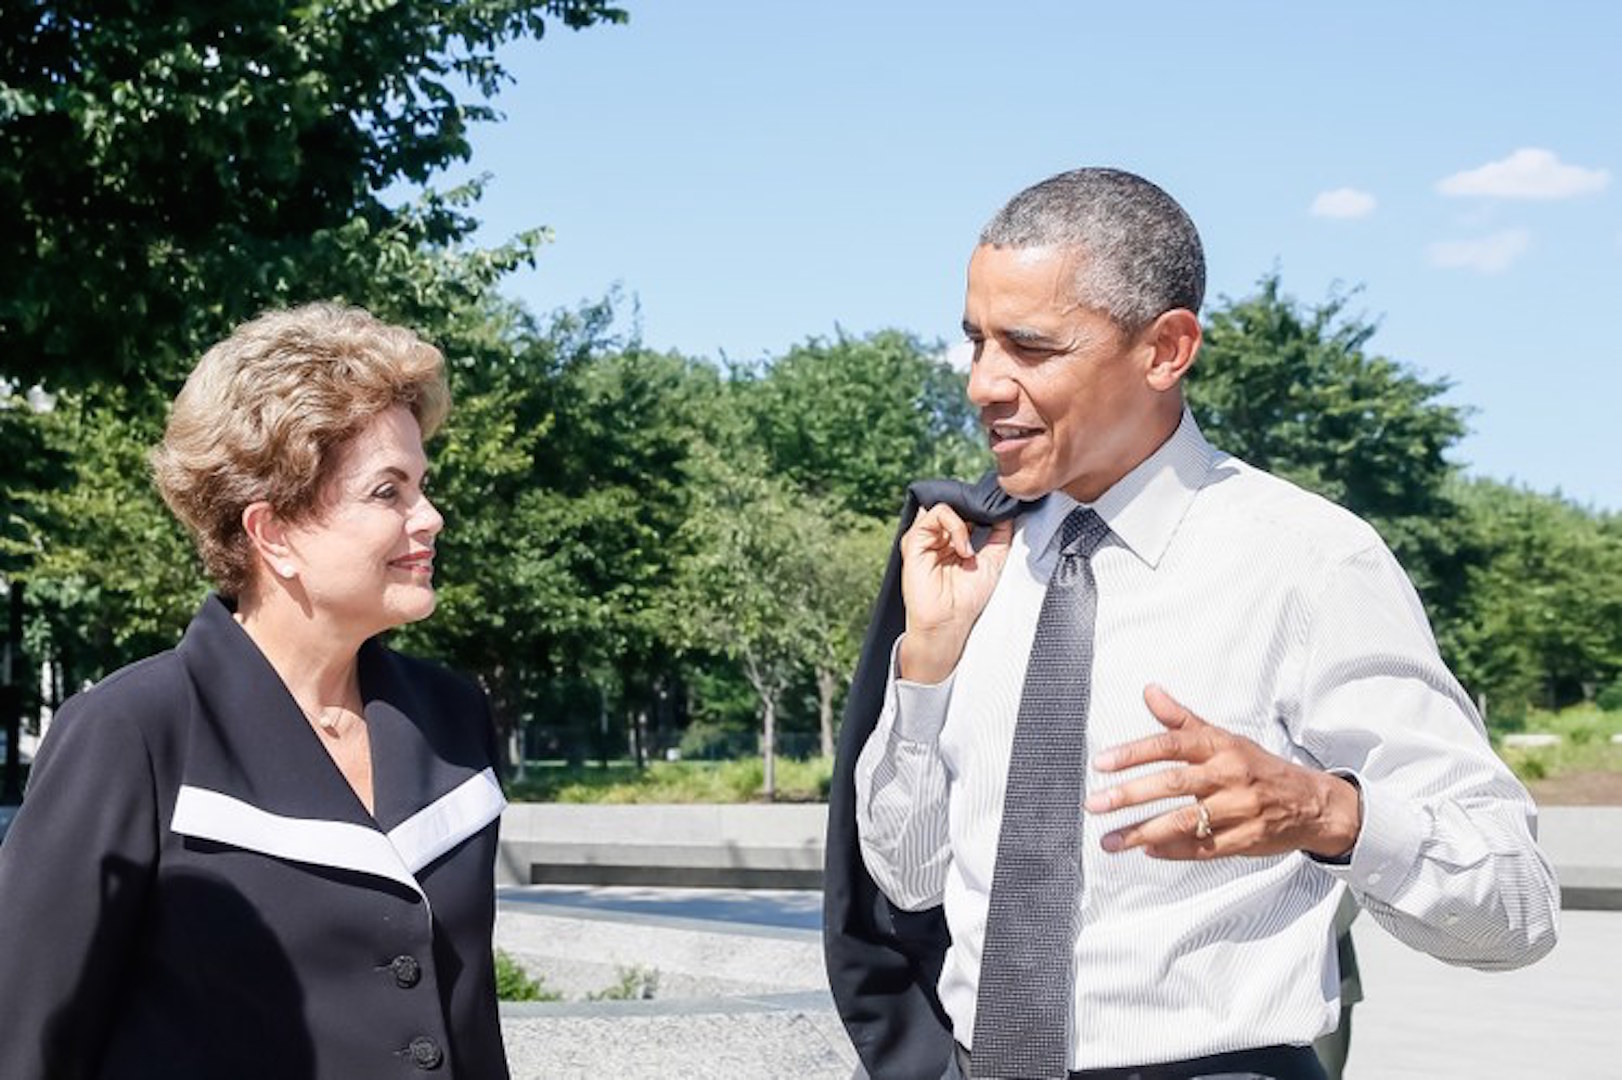 Brazil’s President Rousseff Meets with President Obama in U.S.